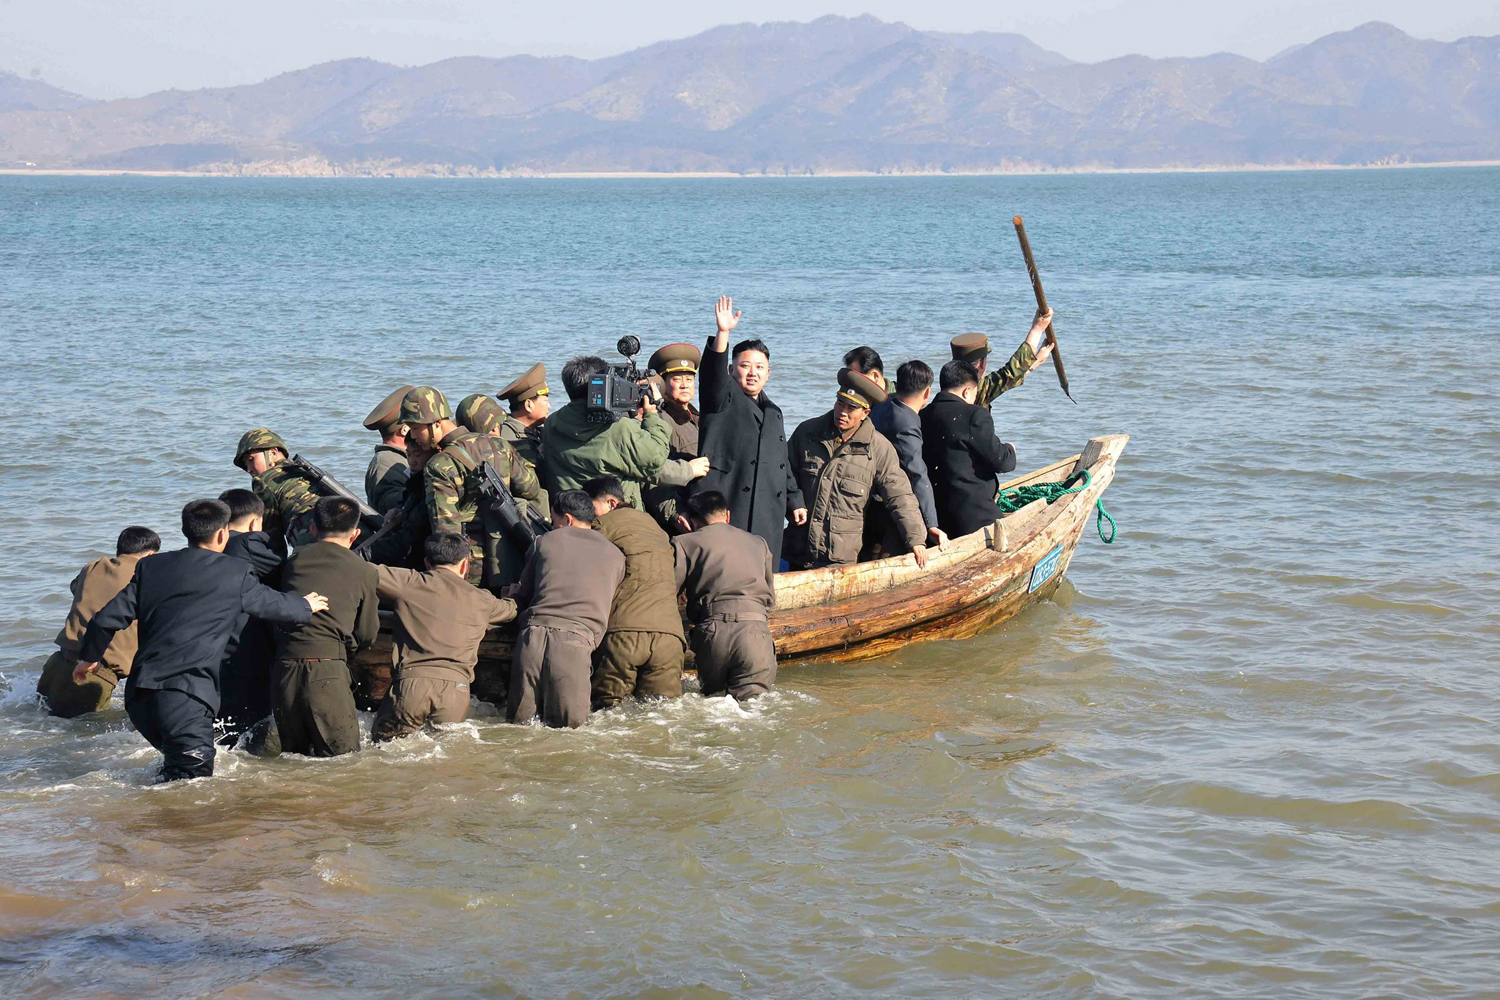 North Korean leader Kim Jong-Un waves while in a boat during his visit to the Wolnae Islet Defence Detachment in the western sector of the front line, which is near Baengnyeong Island of South Korea